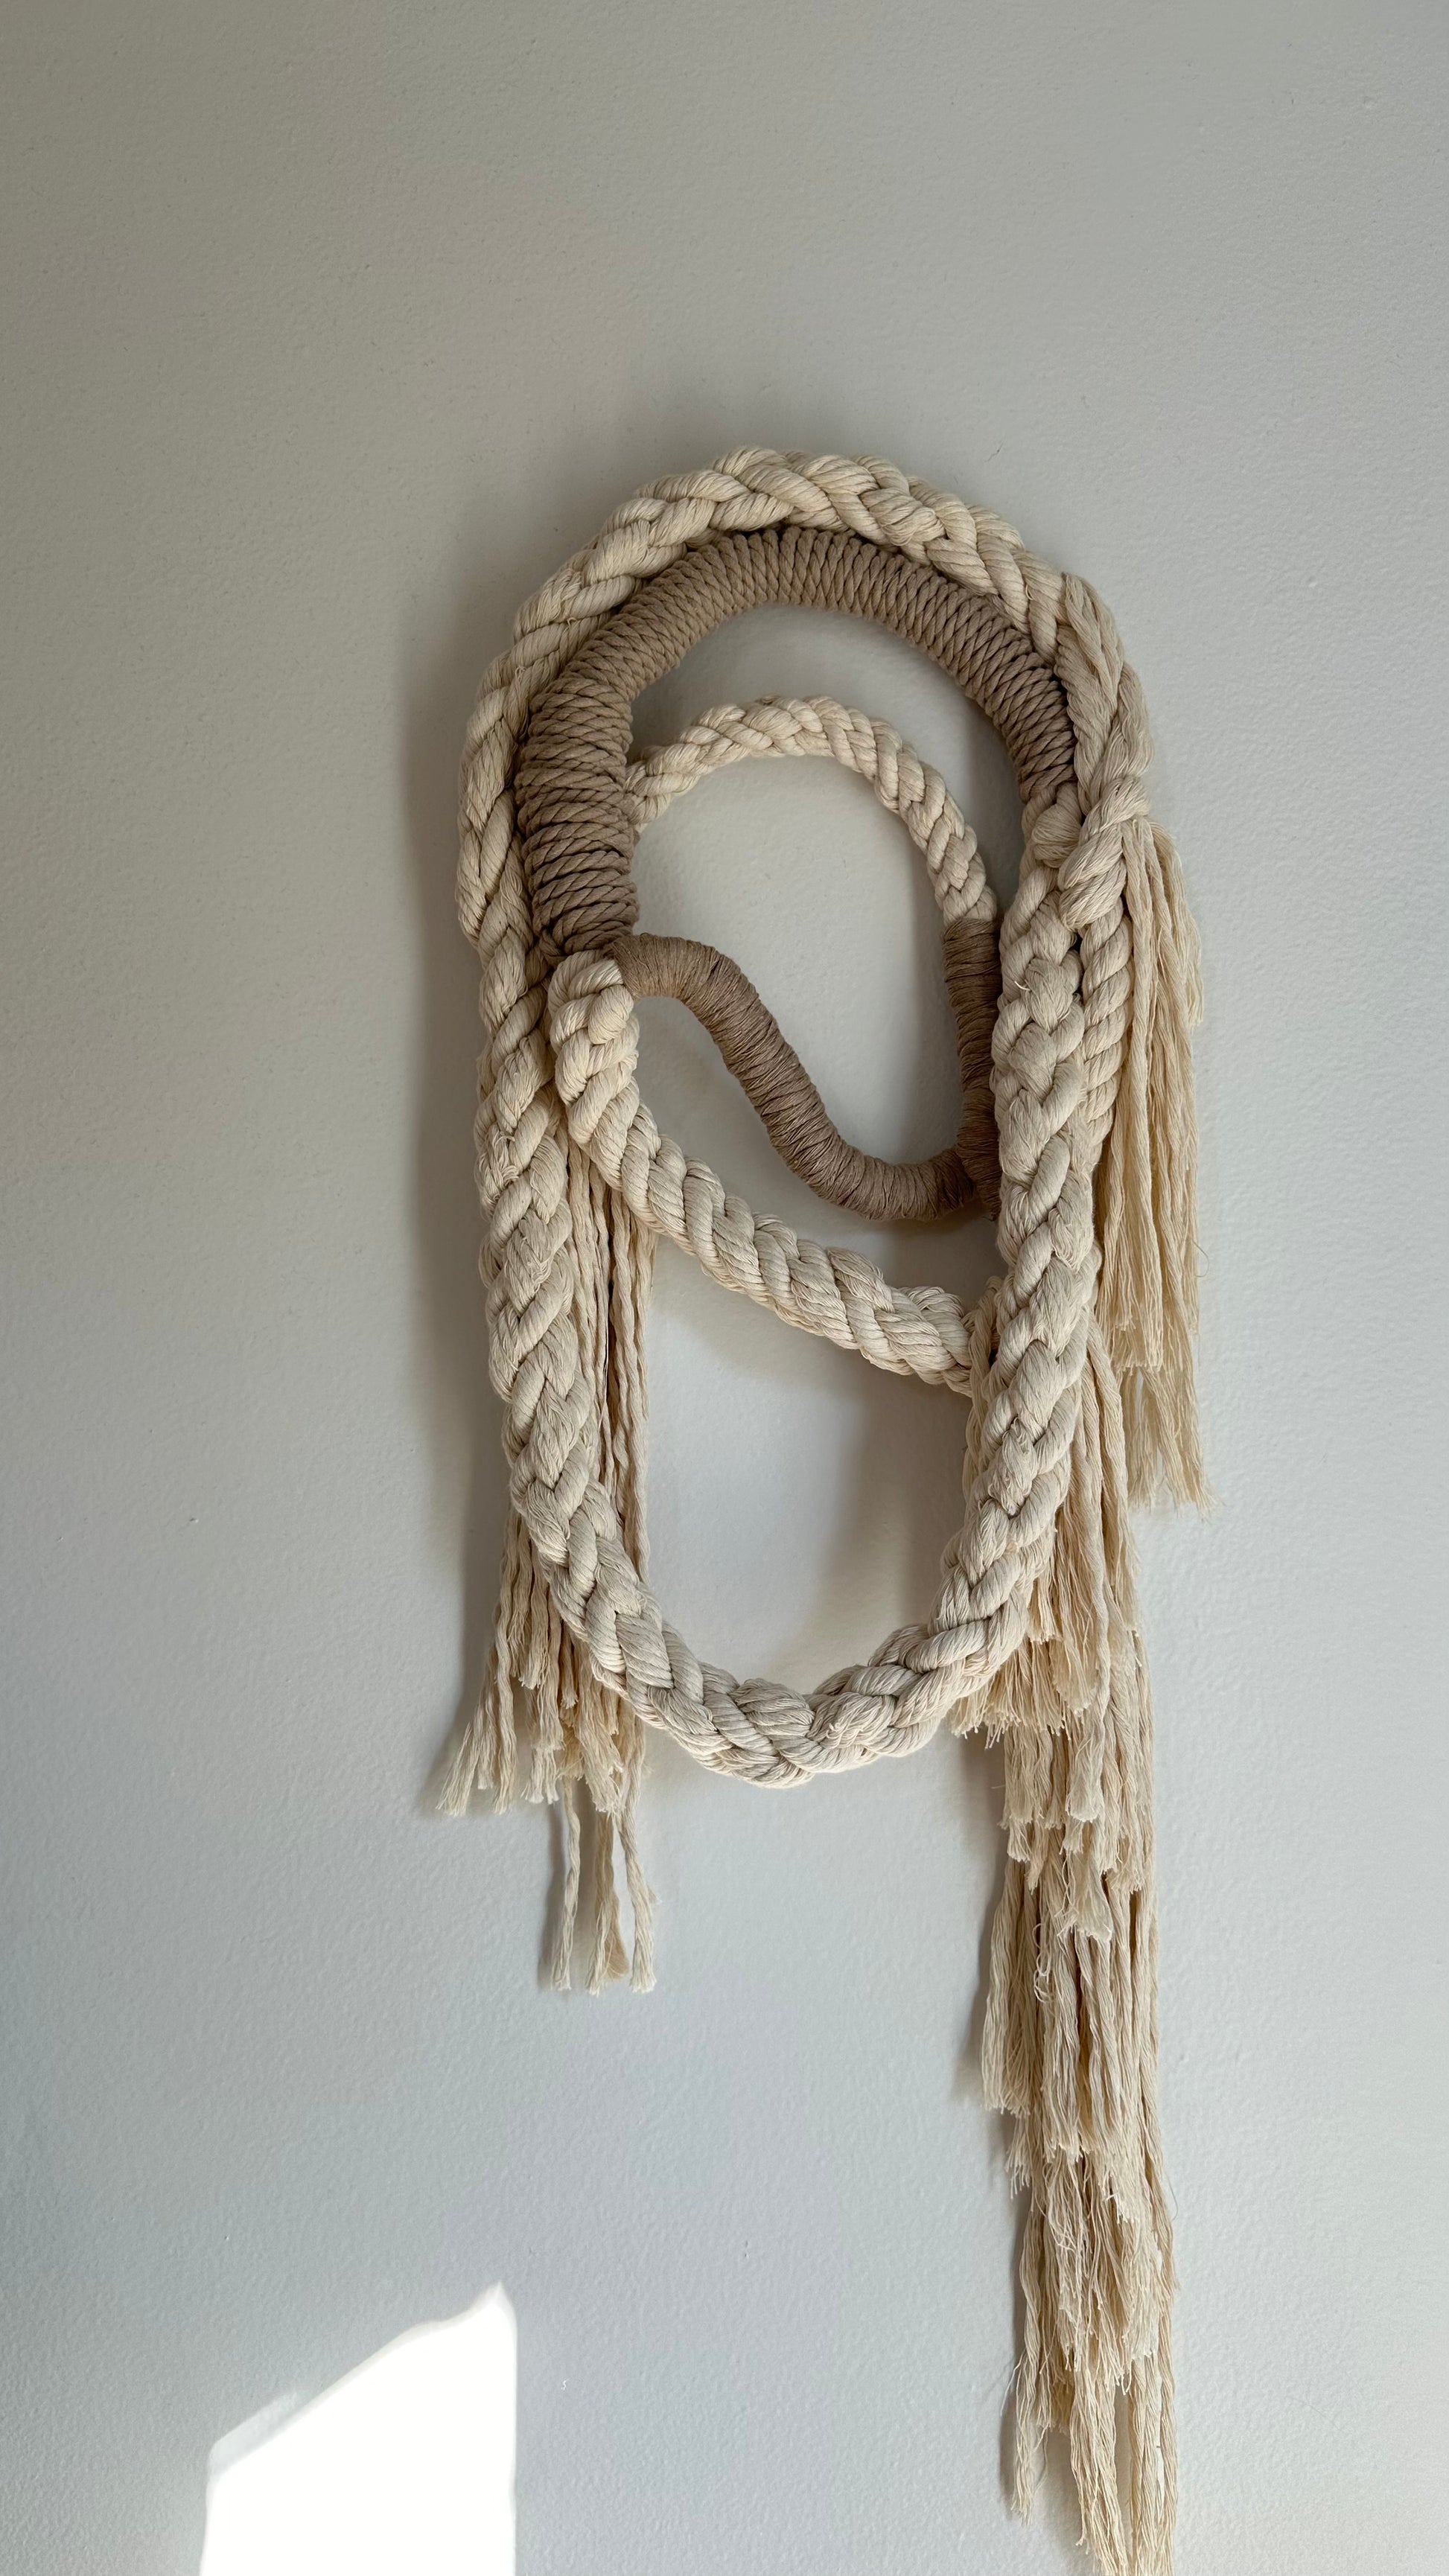 Wall Hanging made of natural colored and tan rope. 